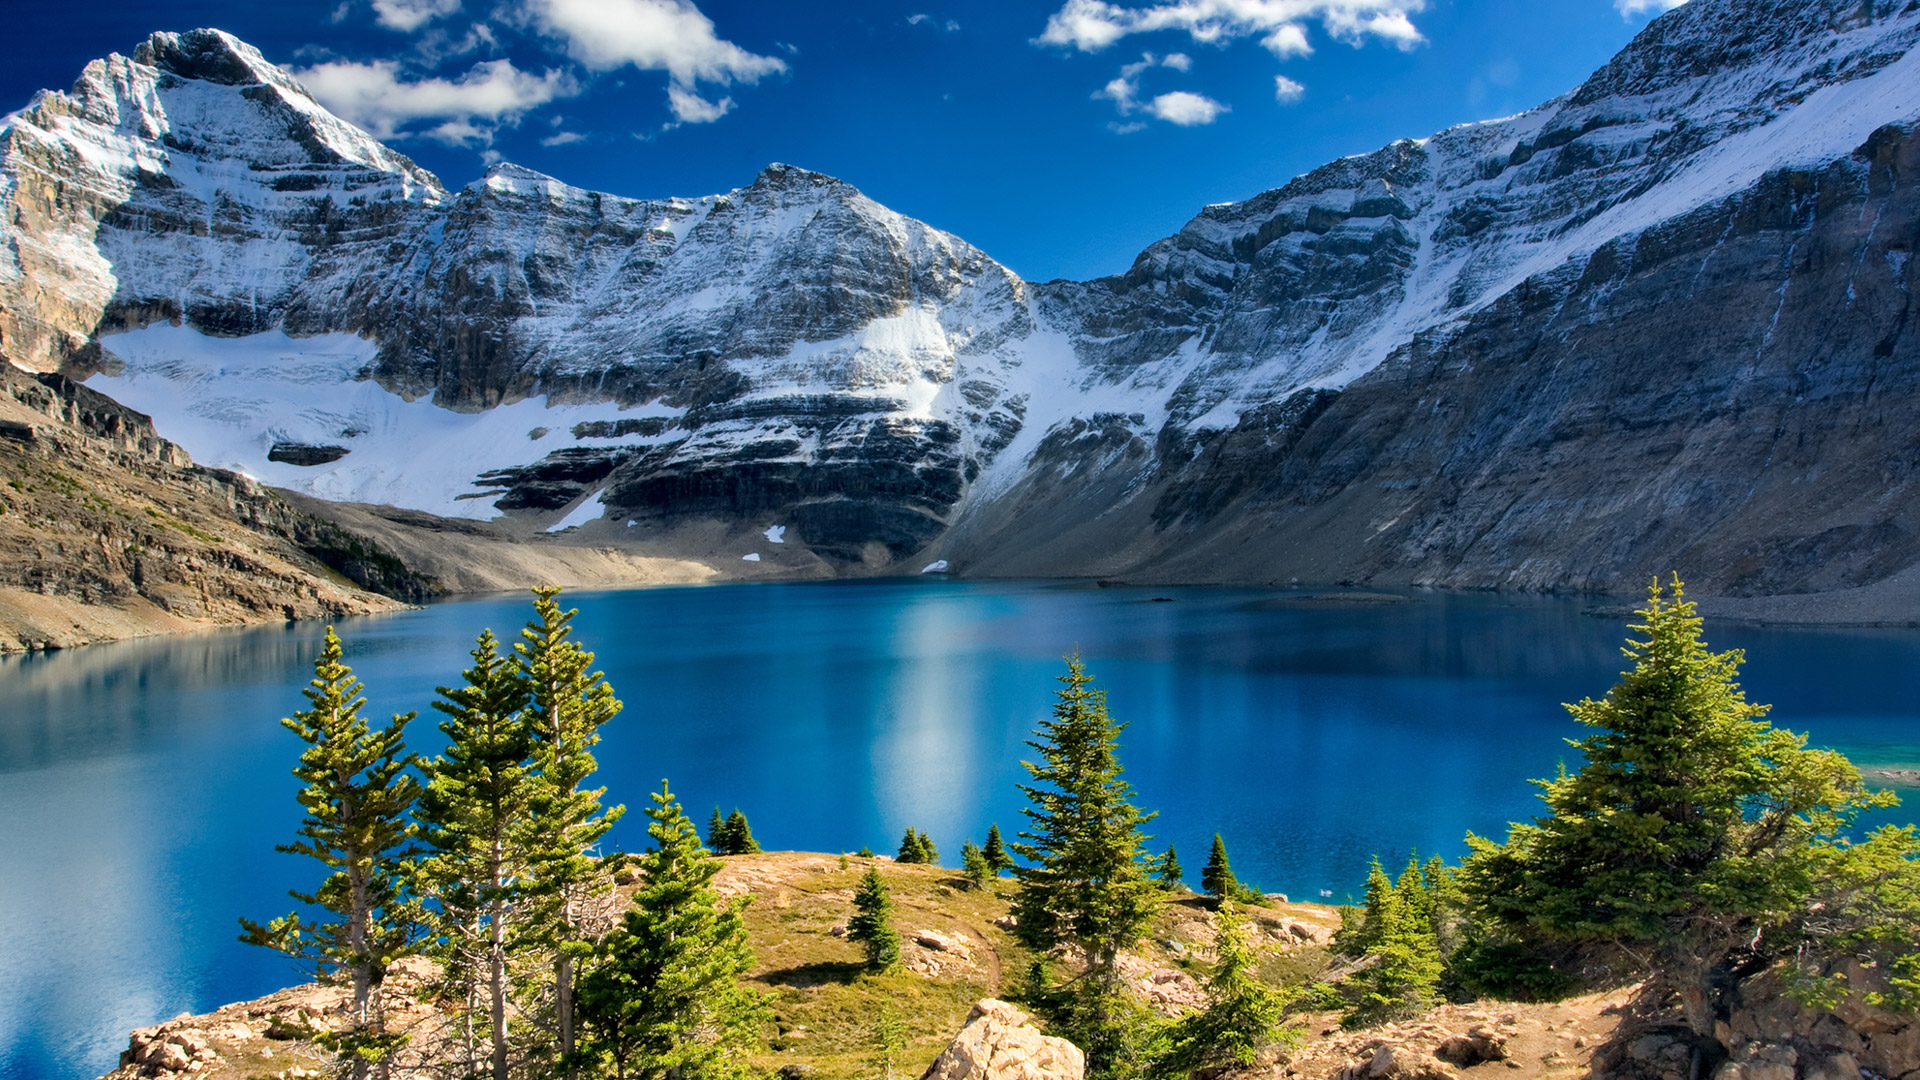 How To Download Mountain Lakes Nature HD Wallpapers 19201080